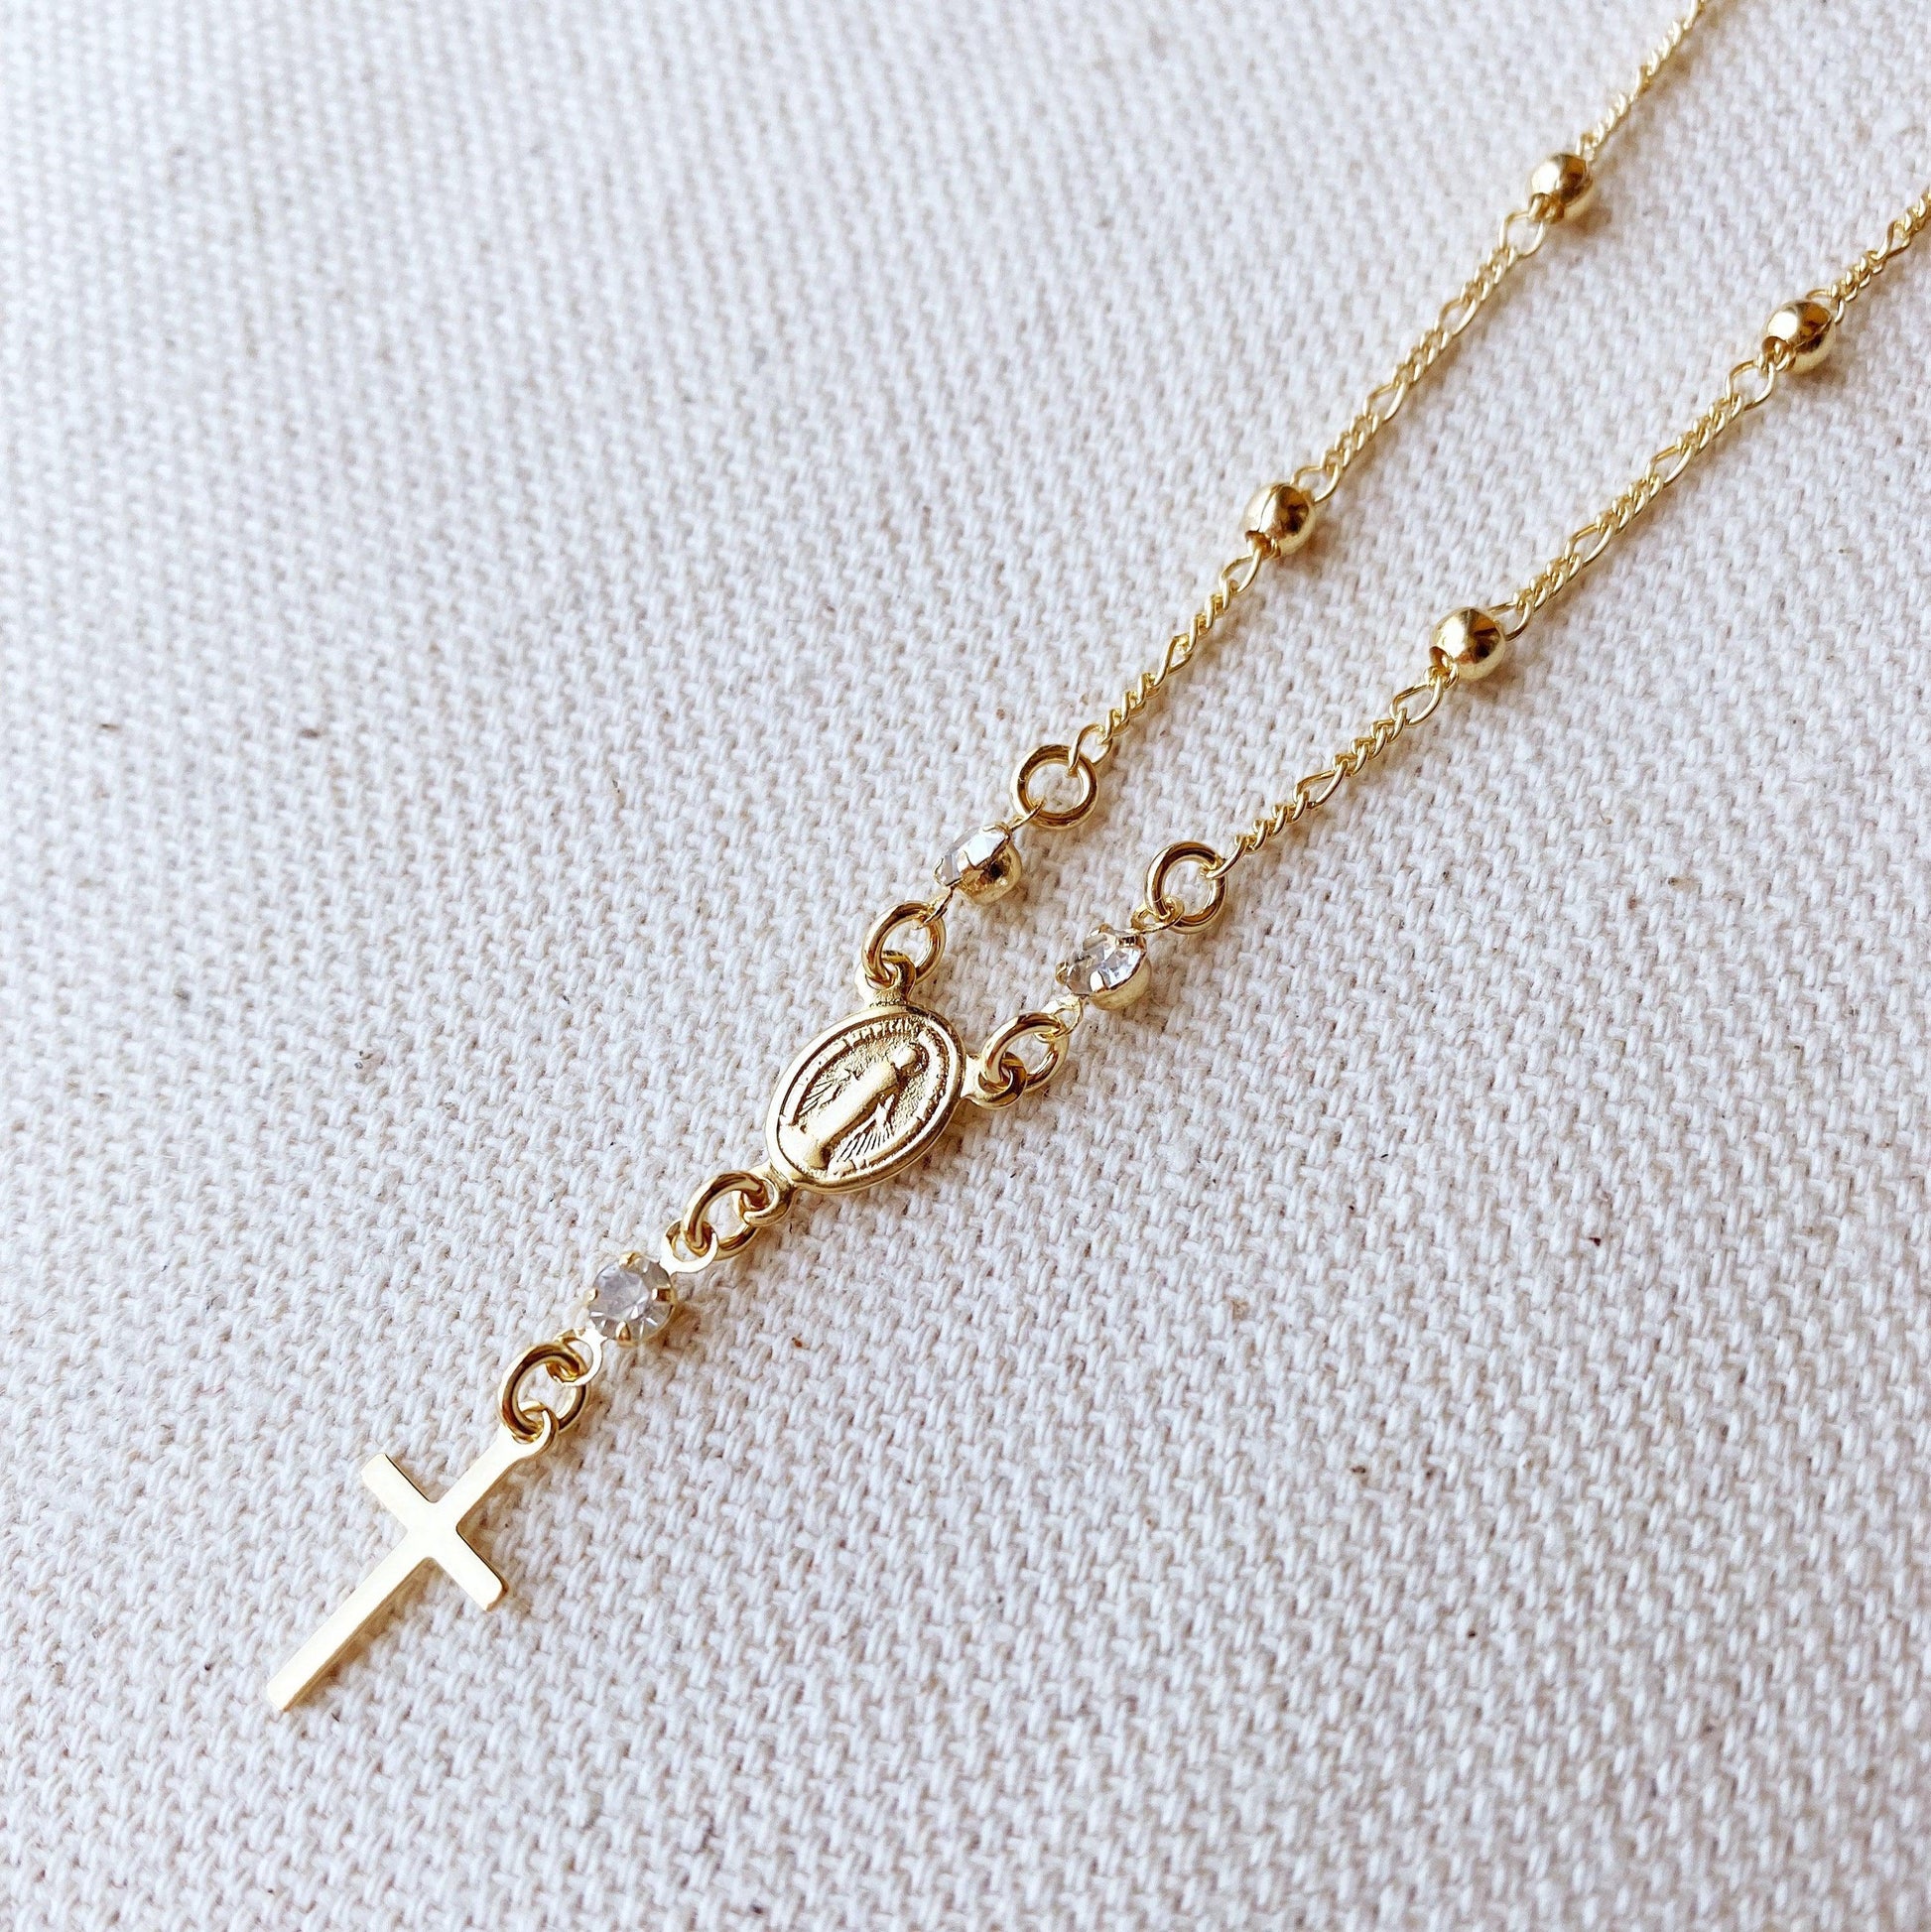 GoldFi 18k Gold Filled Our Lady of Graces Rosary Ball Chain and Small Plain Cross